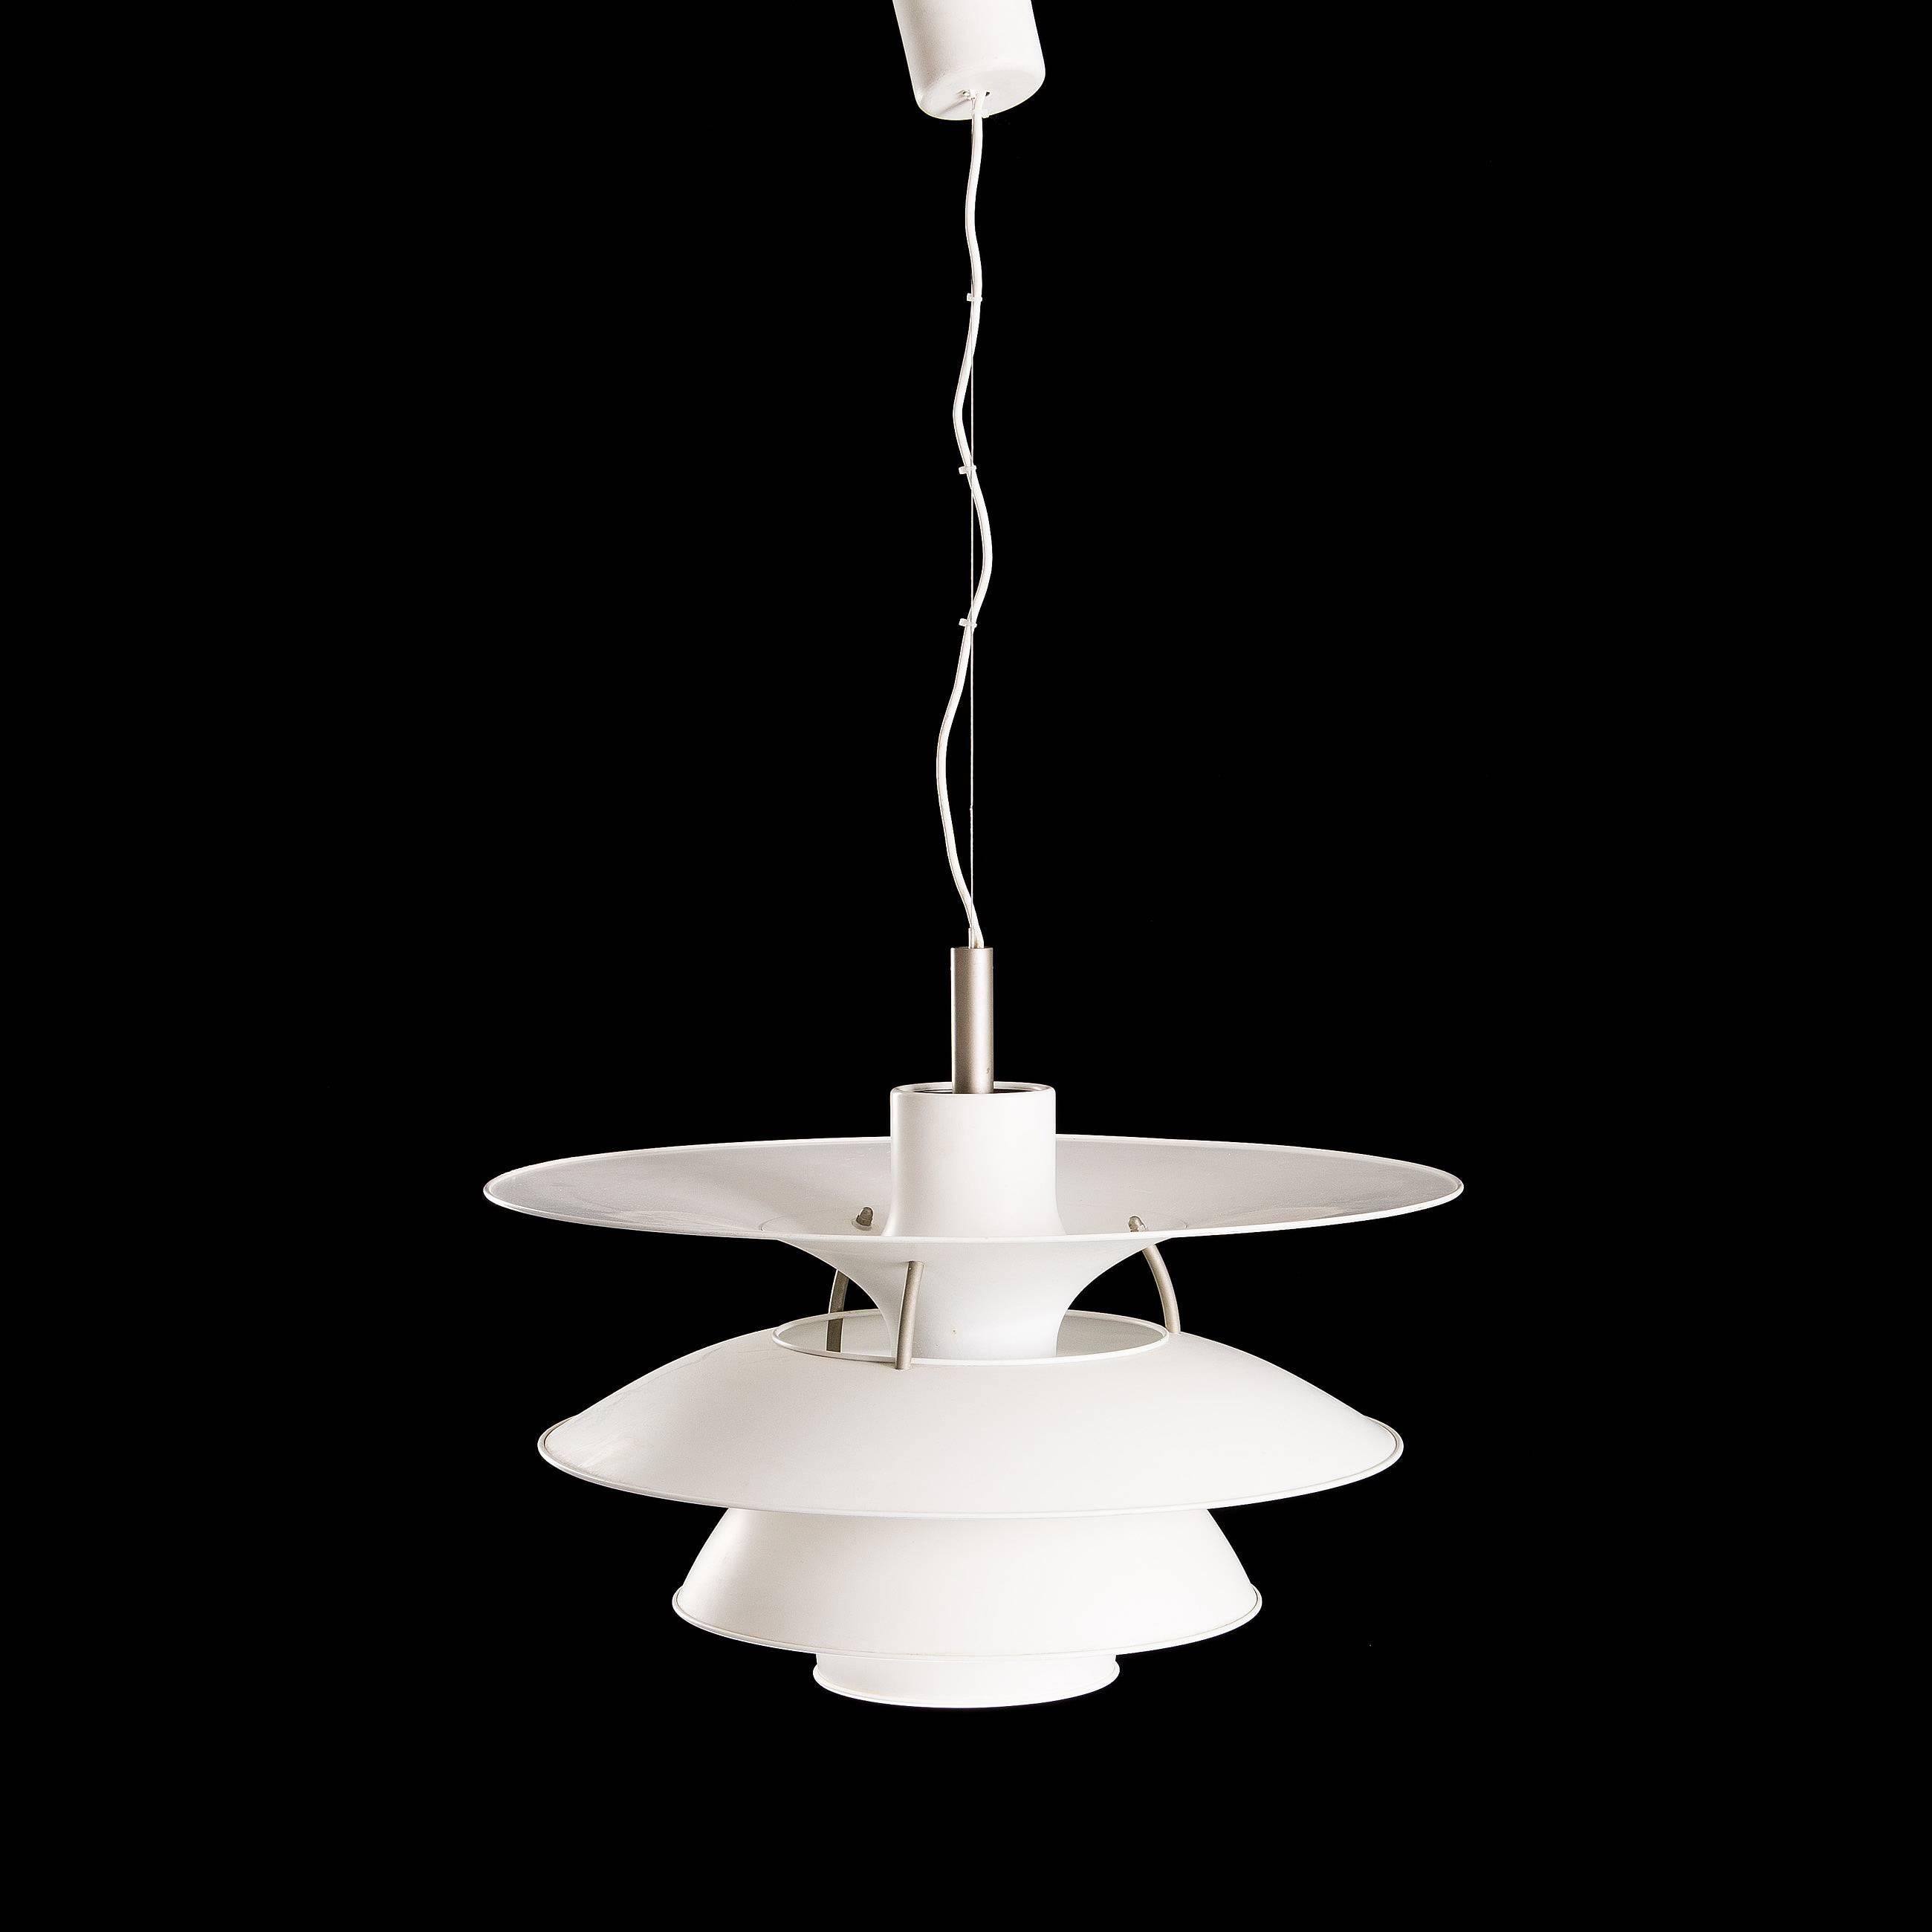 The largest model of Poul Henningsen PH lamps PH 6½-6 pendant light with white painted metal shades. 
Poul Henningsen designed the lamp for the Charlottenborg exhibition building in Copenhagen. The lamp is fitted with one E40 socket for max 500W